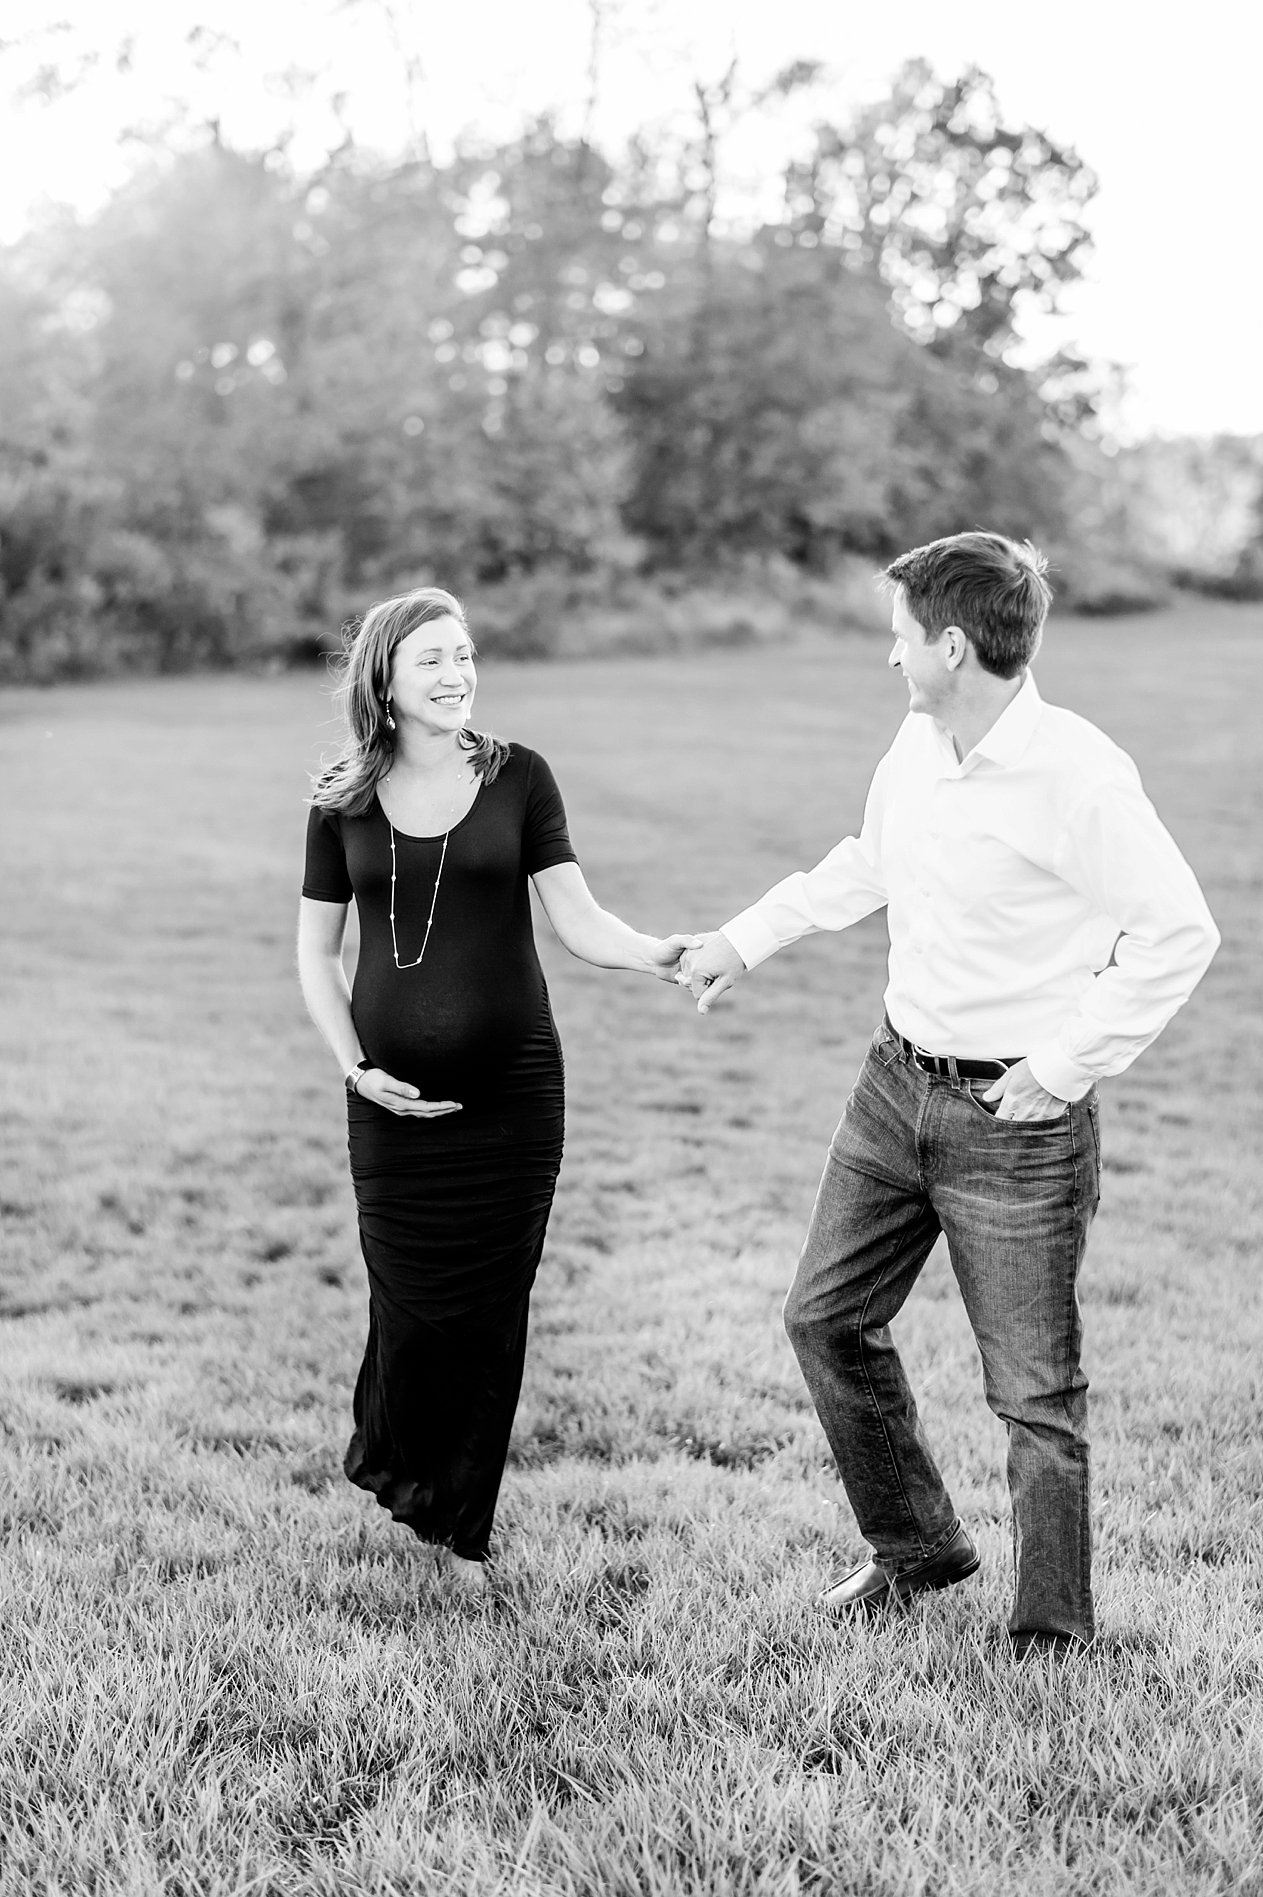 Home Maternity Session by Fine Art Photographer by Lauren R Swann